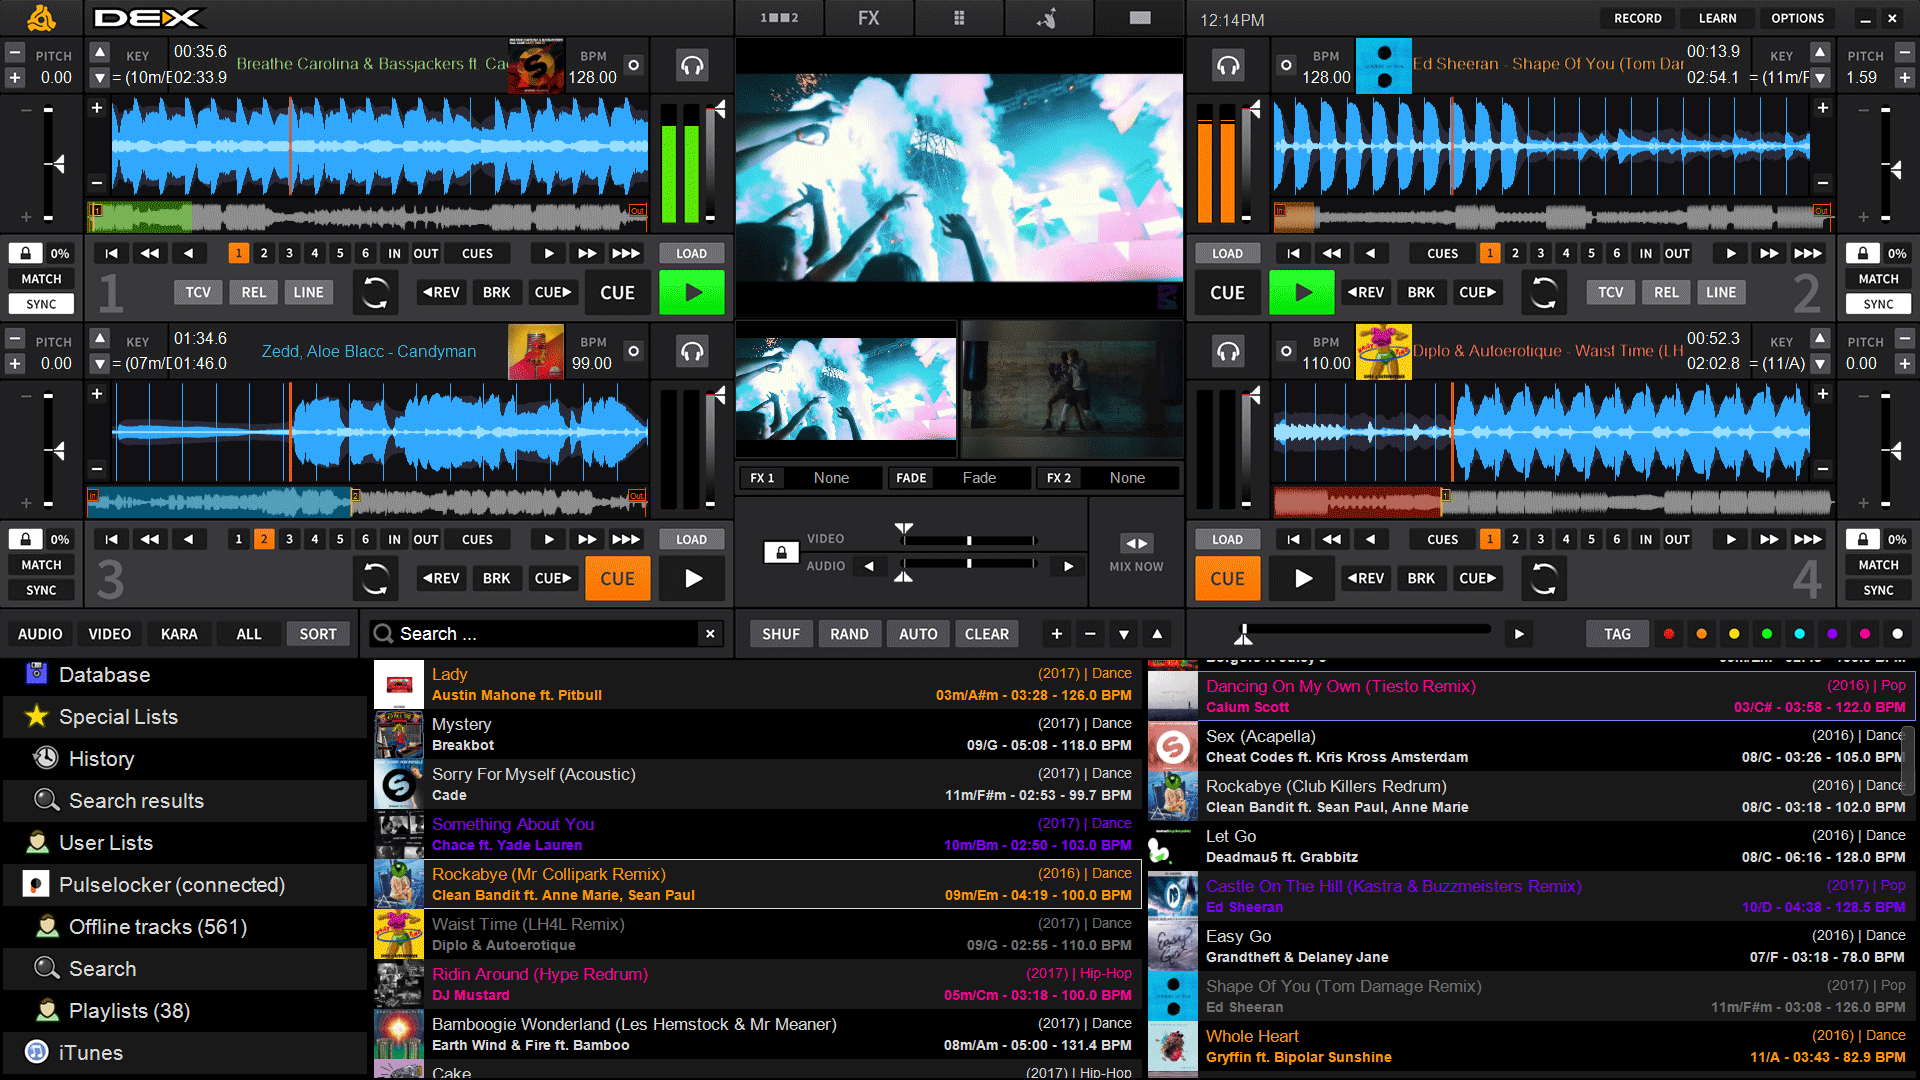 PCDJ DEX 3.20.6 download the new version for iphone